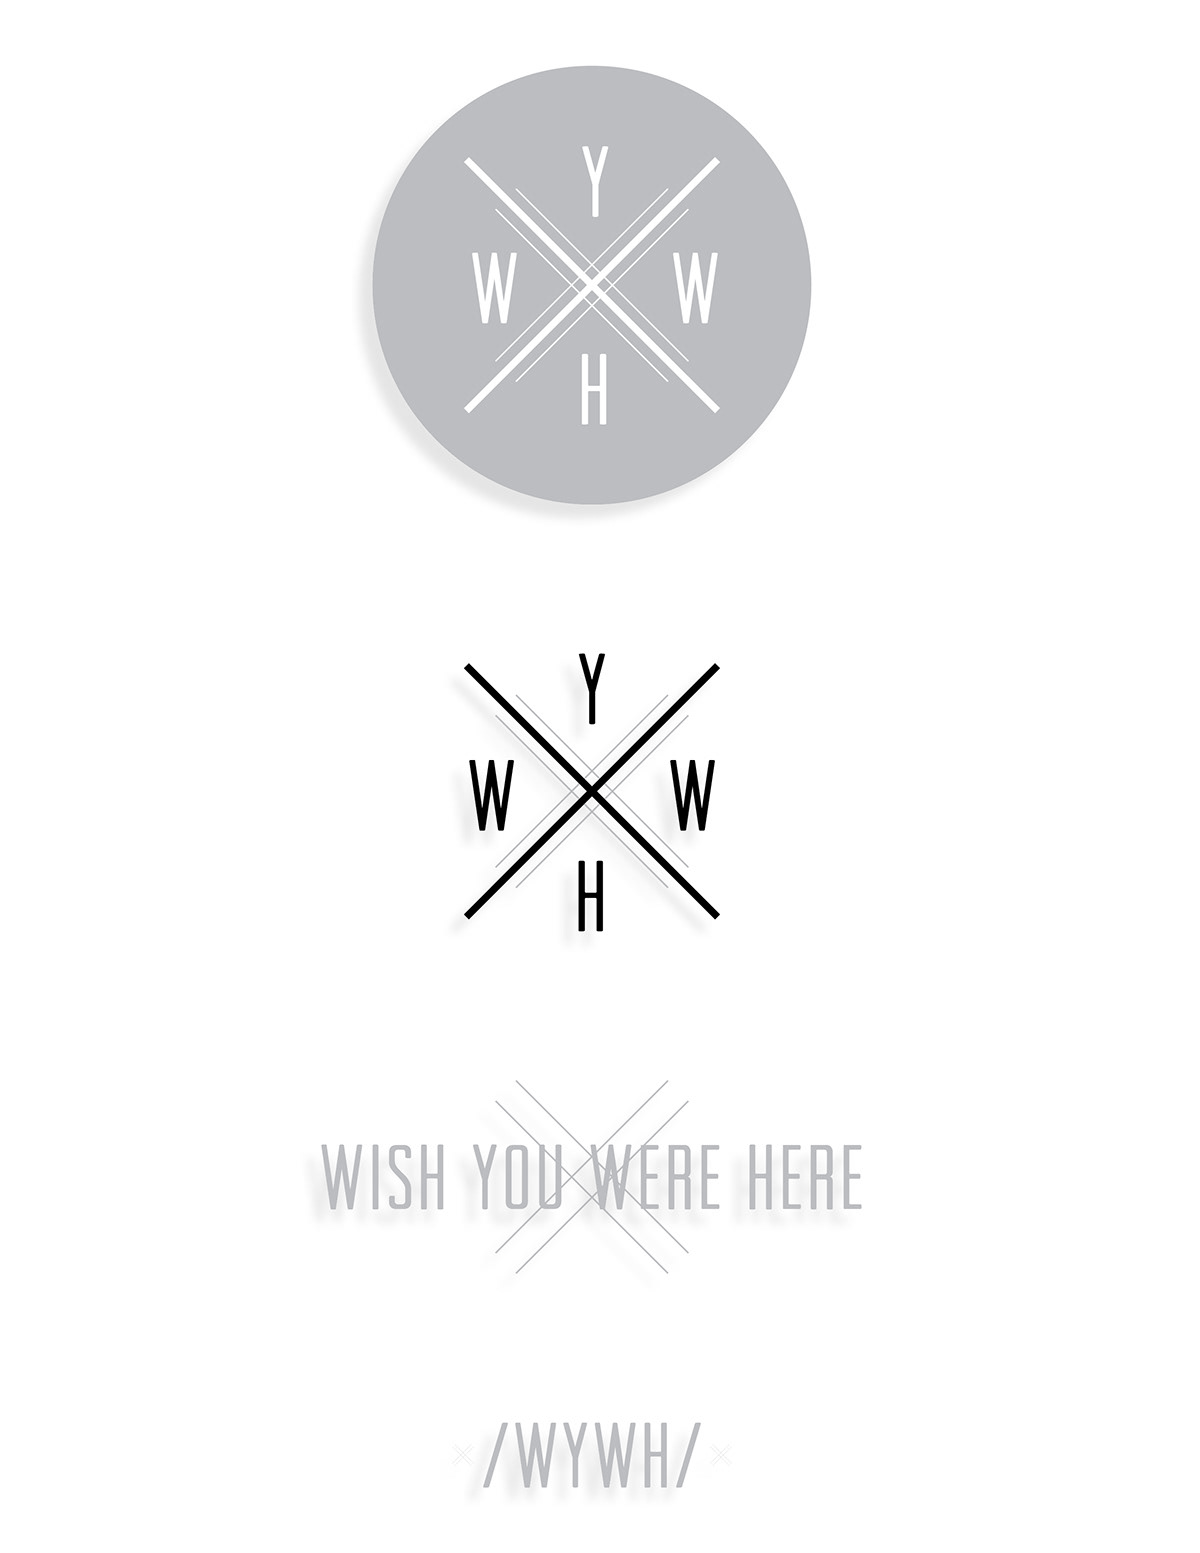 wish here were You print anderson AU WYWH wish you were